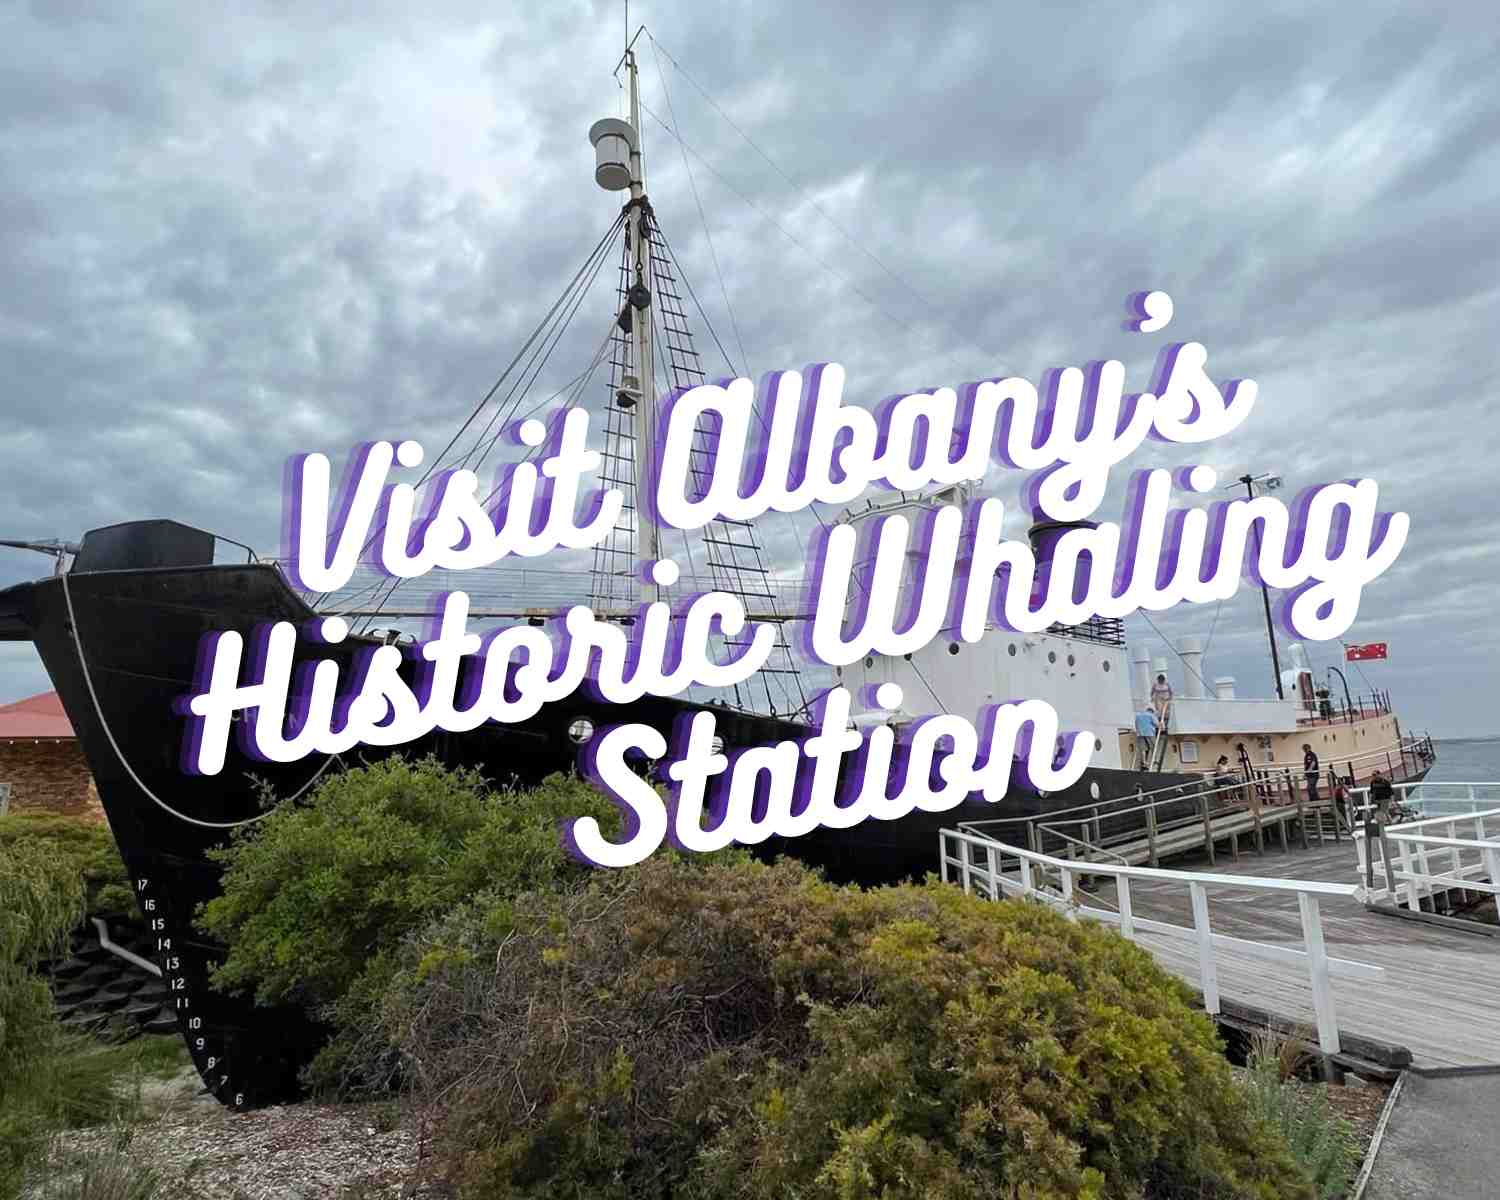 Visit the historic whaling station in Albany